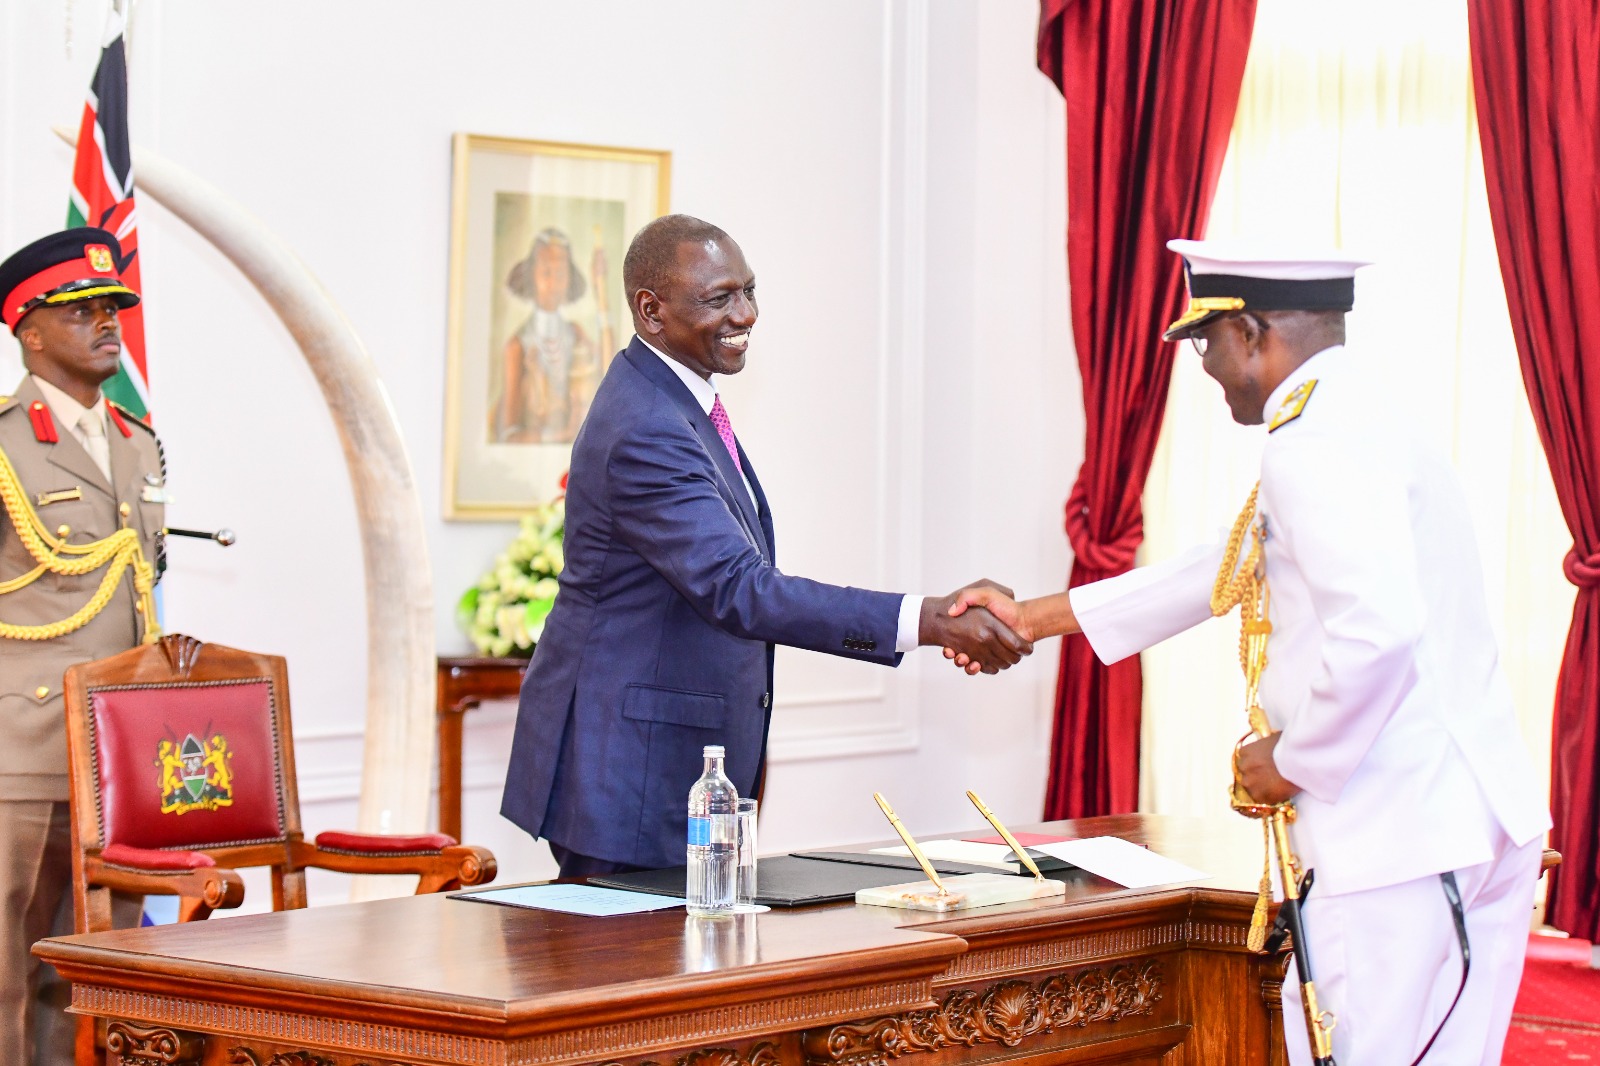 President William Ruto with the Director General of Kenya Coast Guard Bruno Shioso at State House.